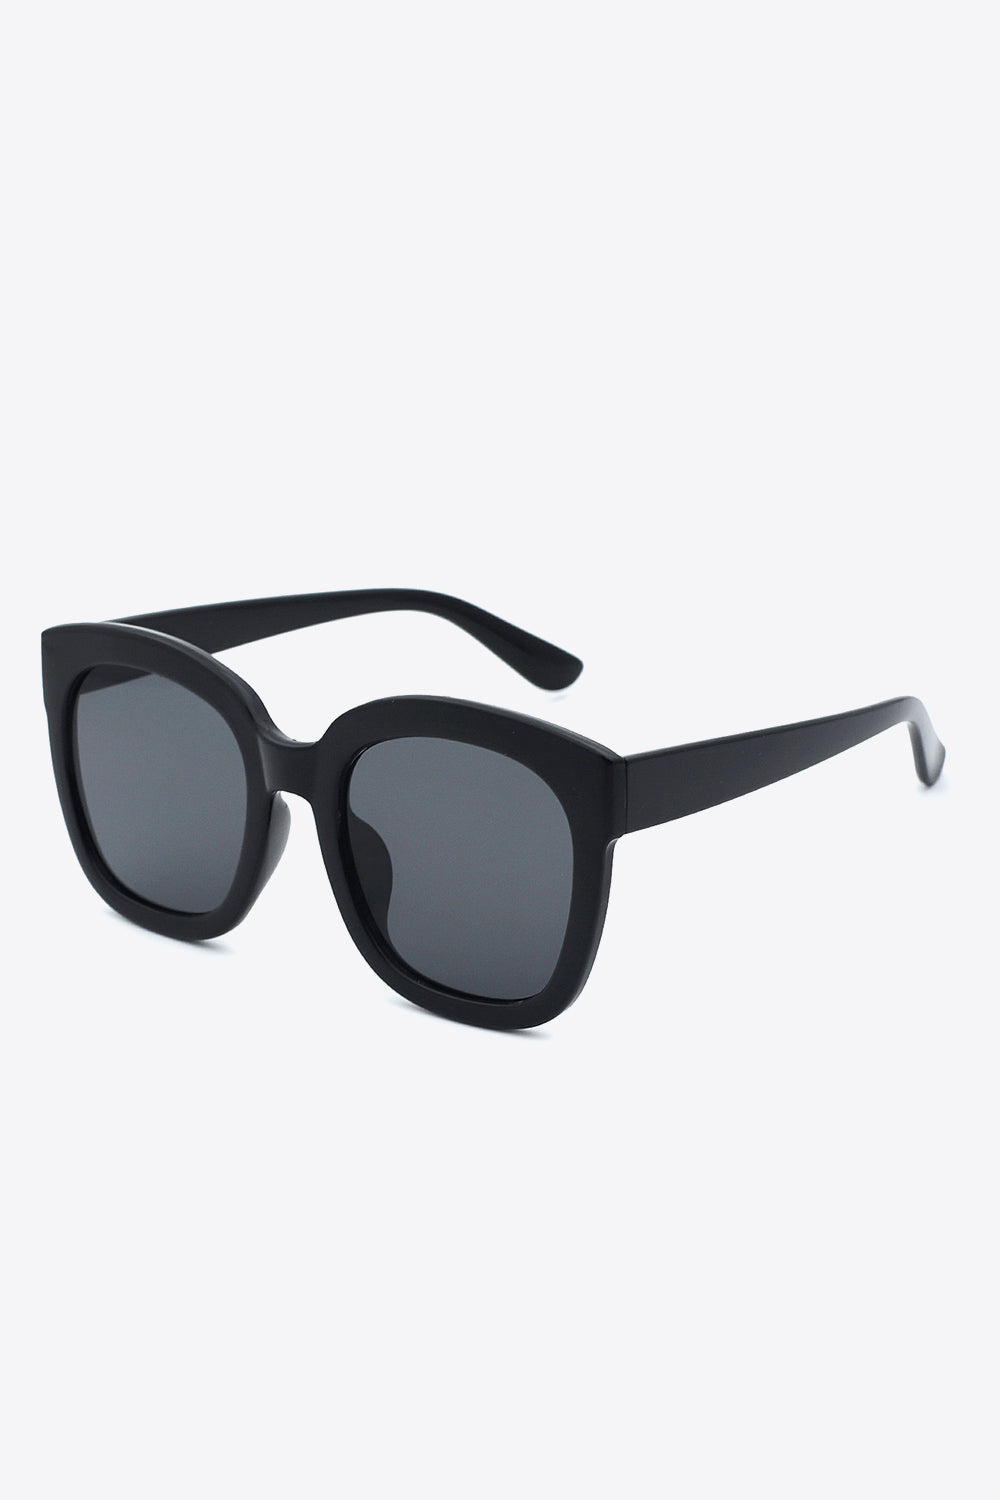 Polycarbonate Frame Square Sunglasses Print on any thing USA/STOD clothes